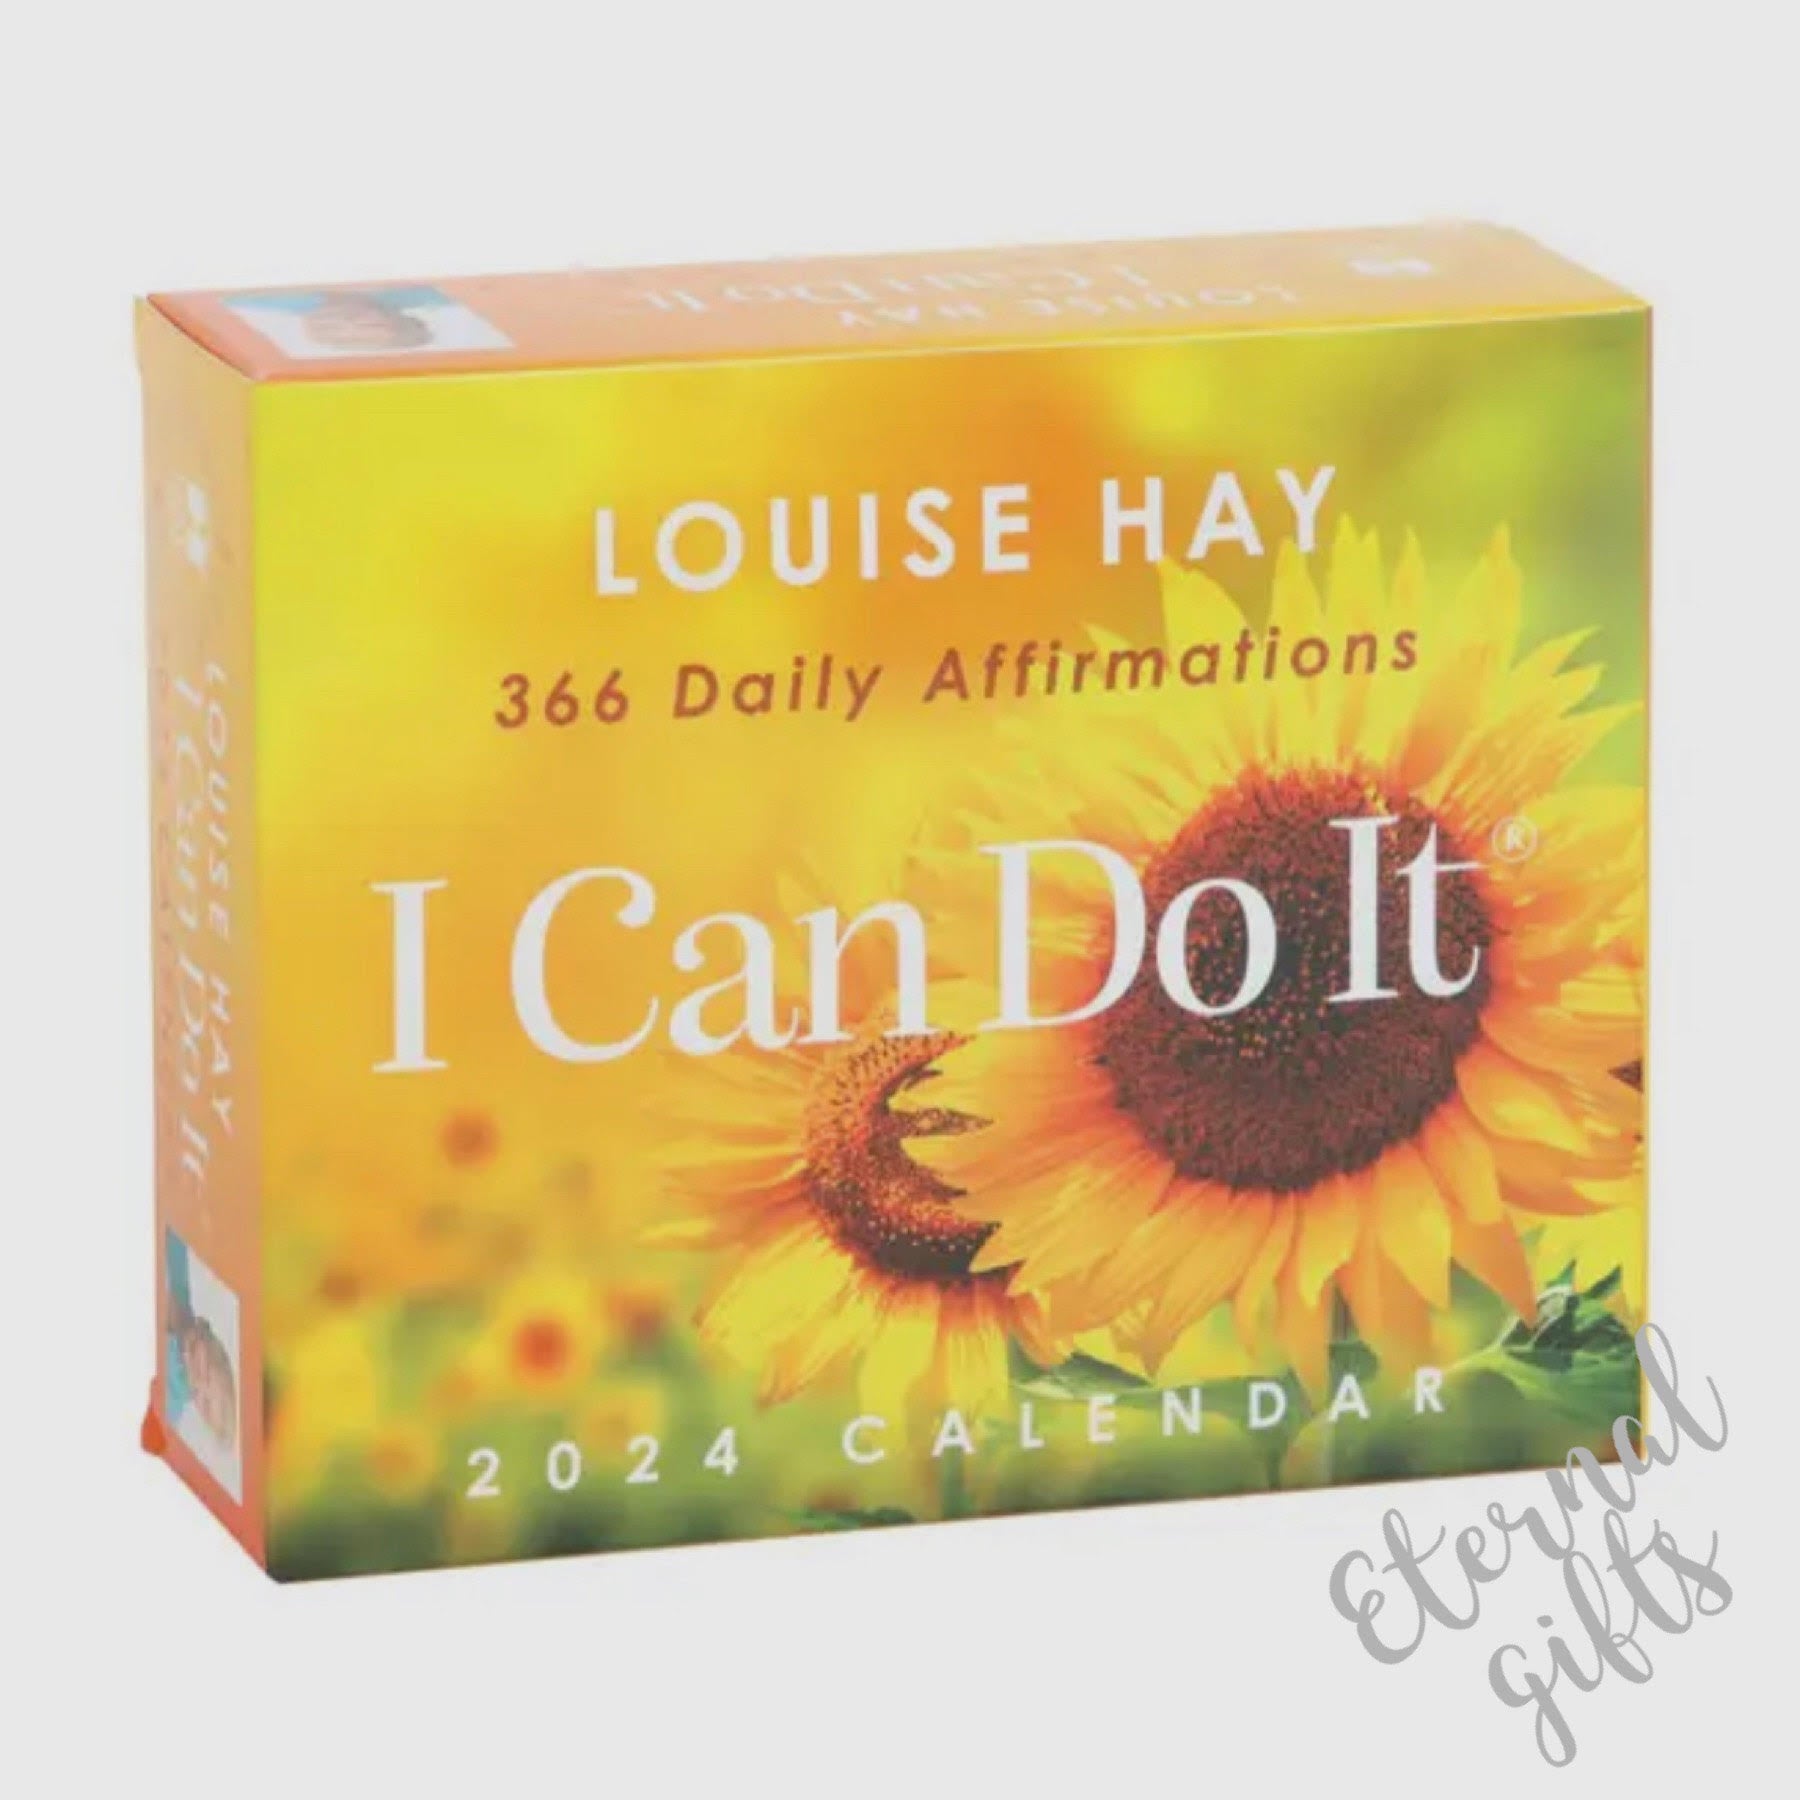 I Can Do It 2024 Calendar - Louise Hay